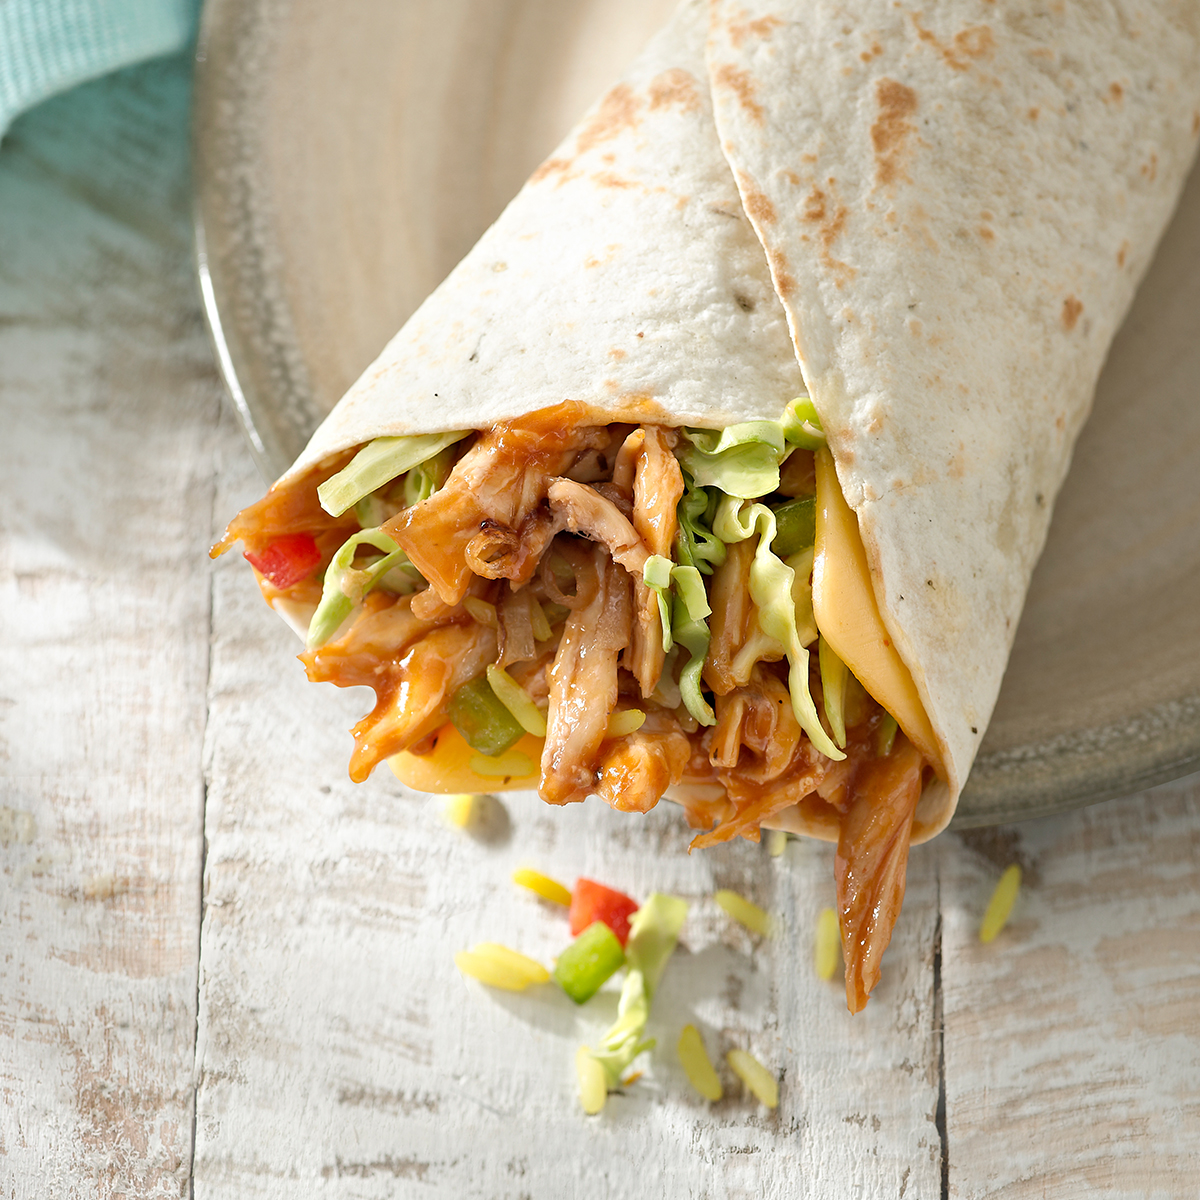 Pulled Chicken And Cheese Wrap On Its Own